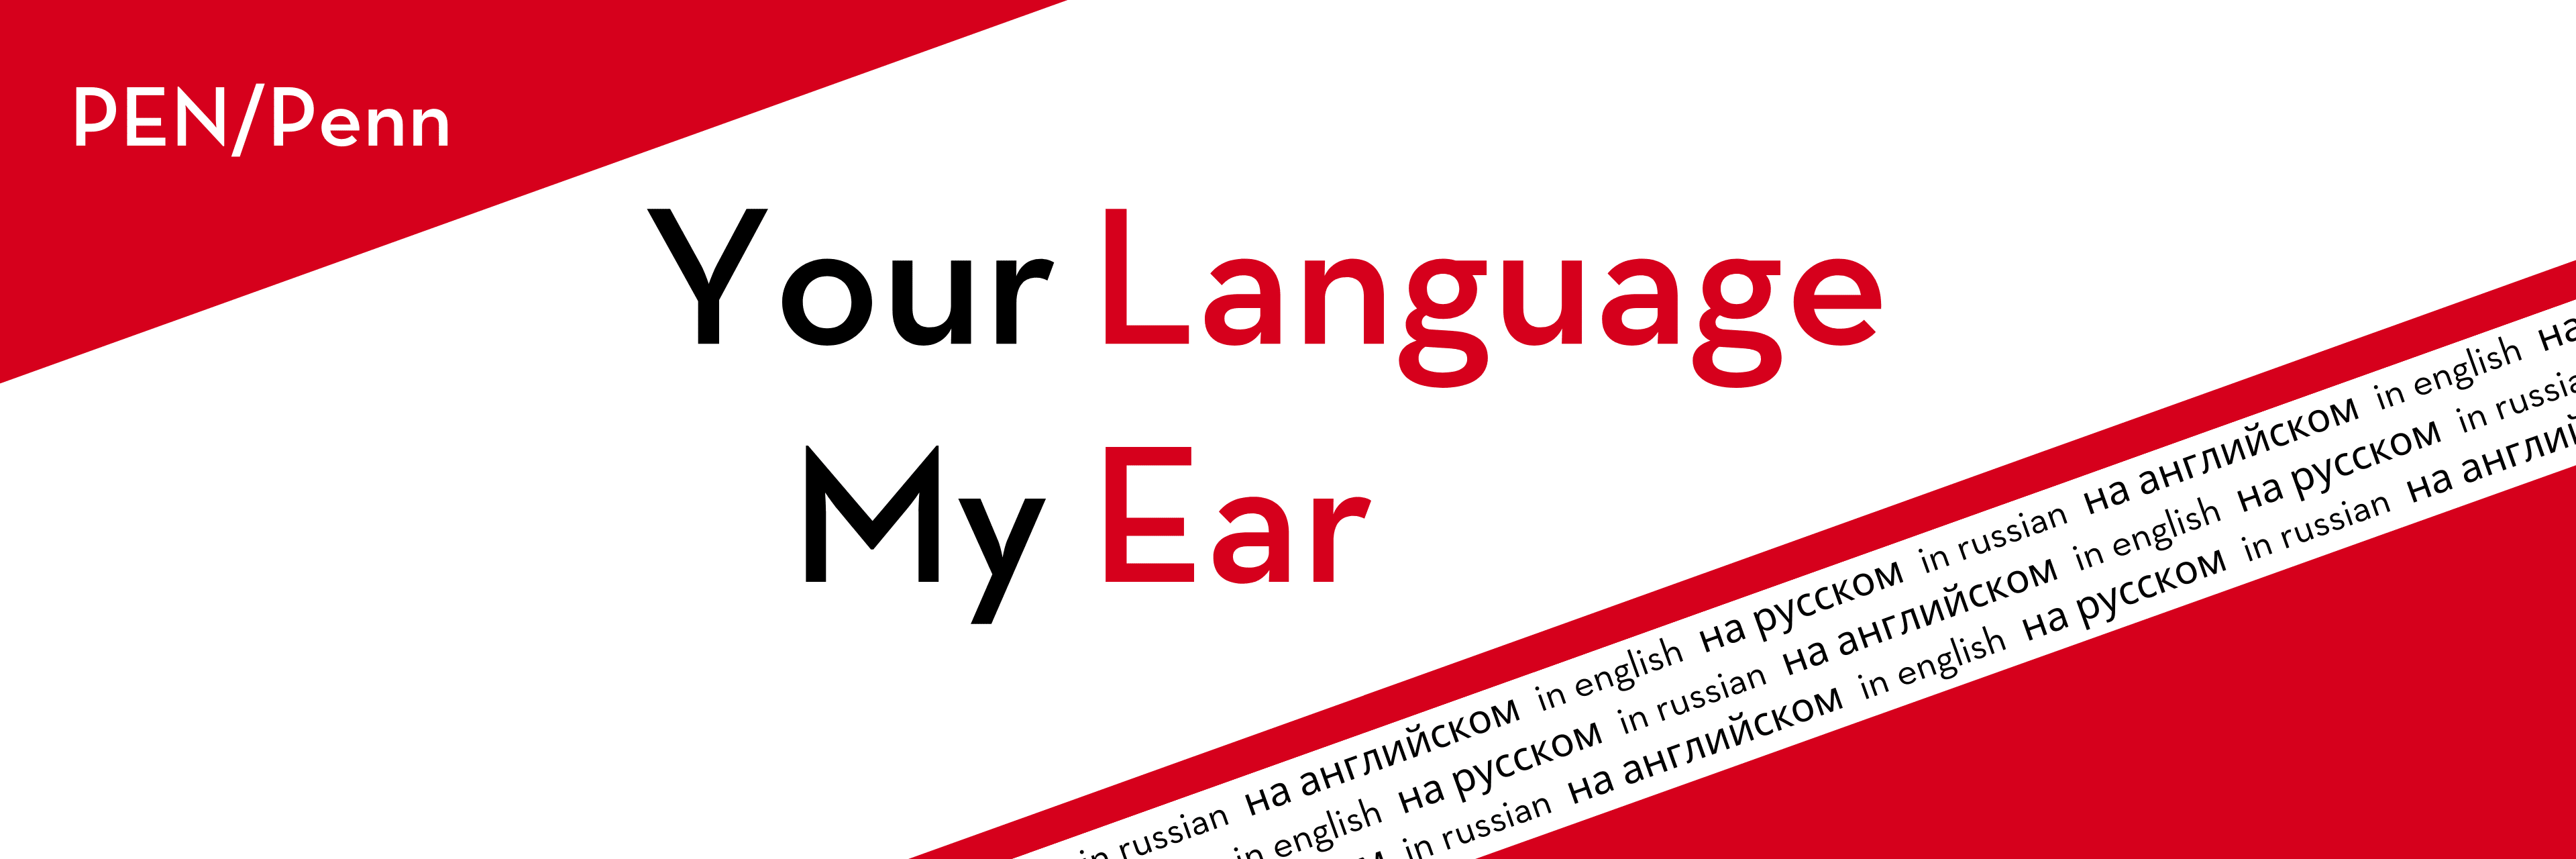 Red and white banner reads Your Language My Ear with Russian and English text reading "in Russian" and "in English" in both languages